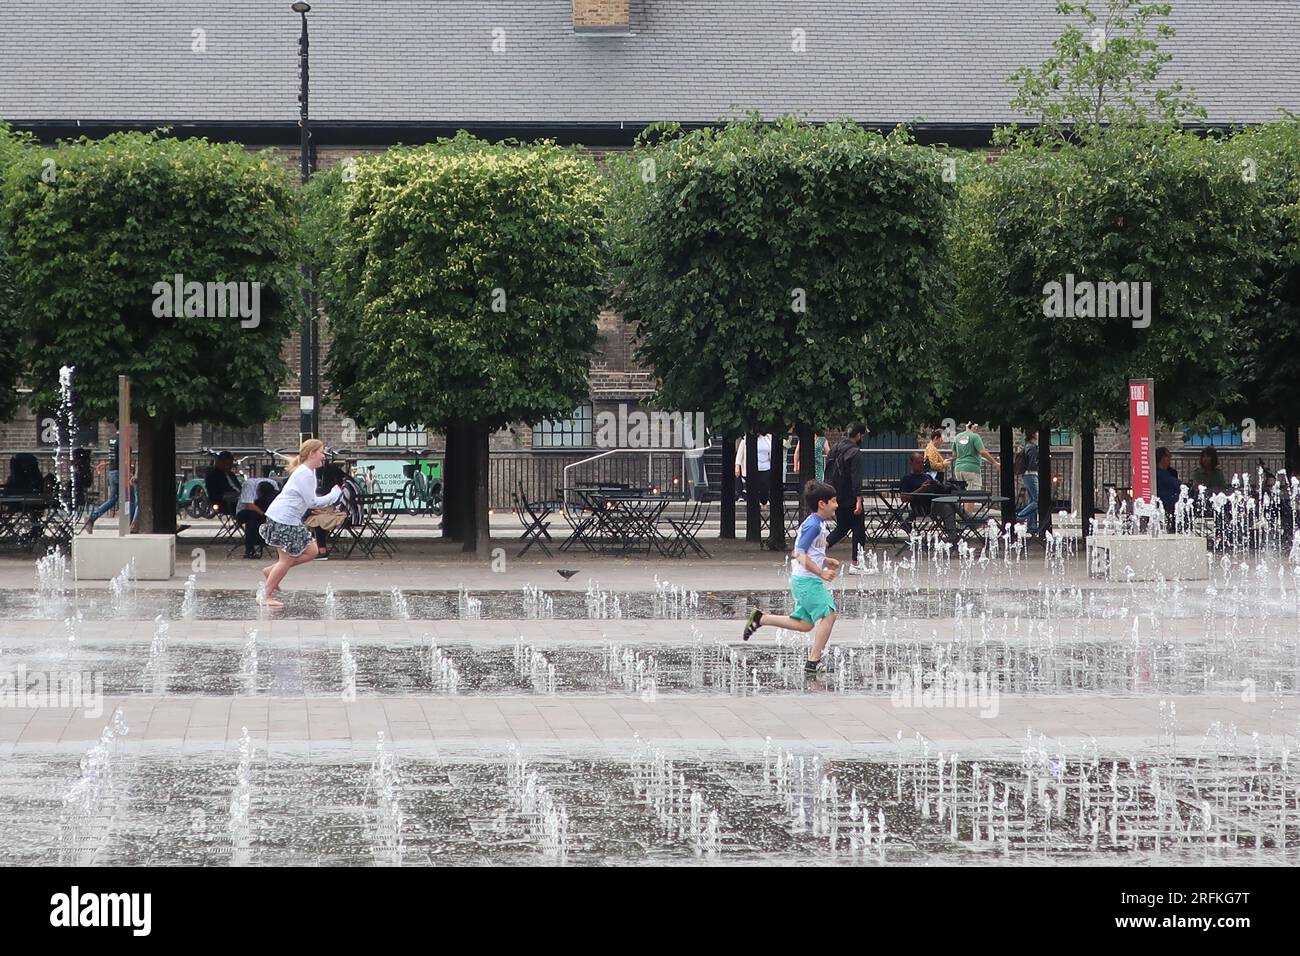 Young children enjoy running through the dancing fountains and water jets in Granary Square, the heart of the redeveloped King's Cross, London. Stock Photo